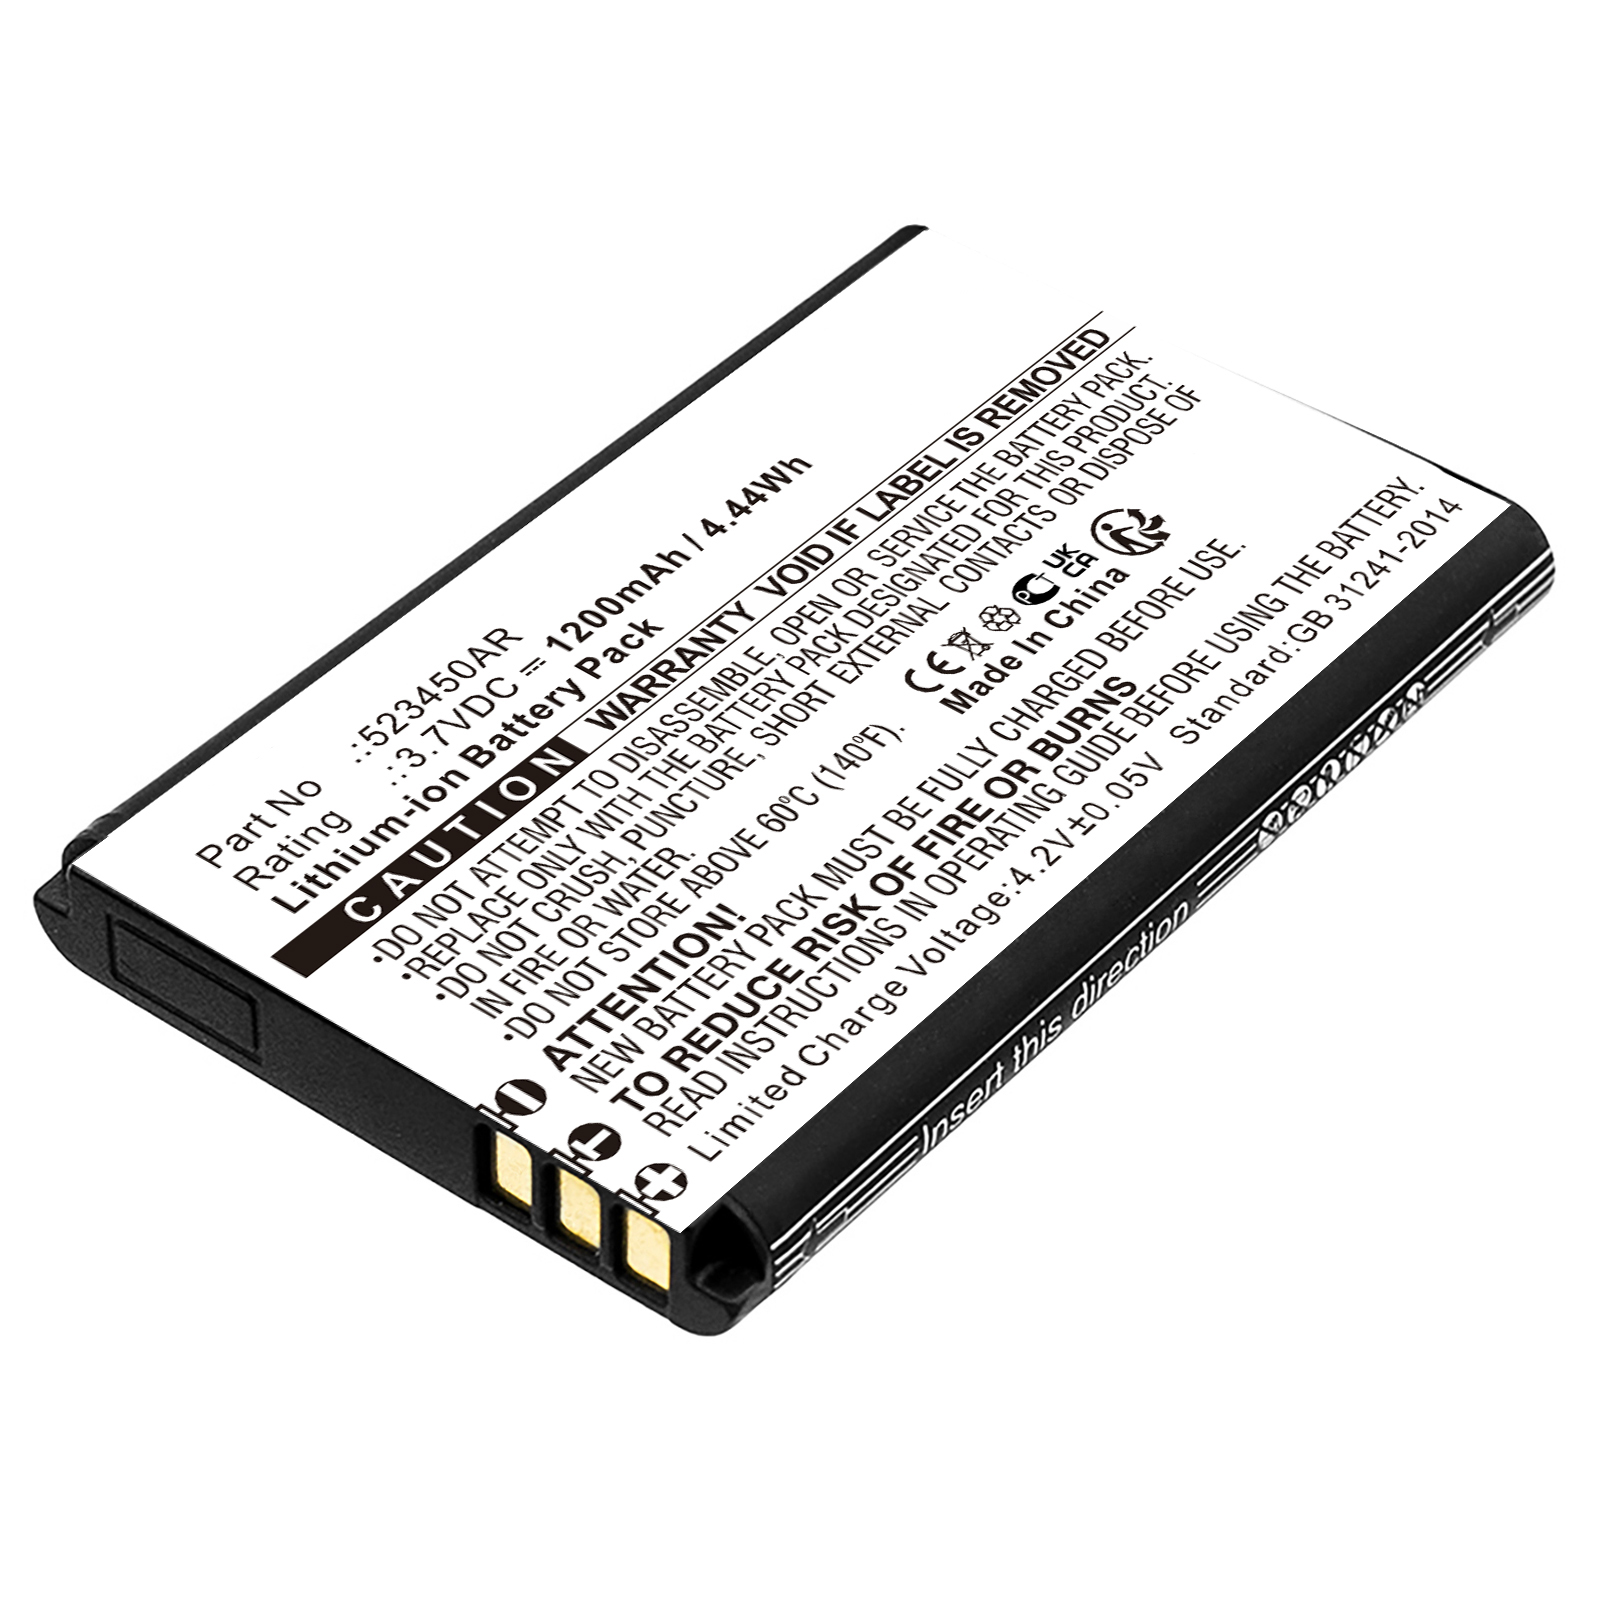 Synergy Digital Cell Phone Battery, Compatible with Panasonic 523450AR Cell Phone Battery (Li-ion, 3.7V, 1200mAh)